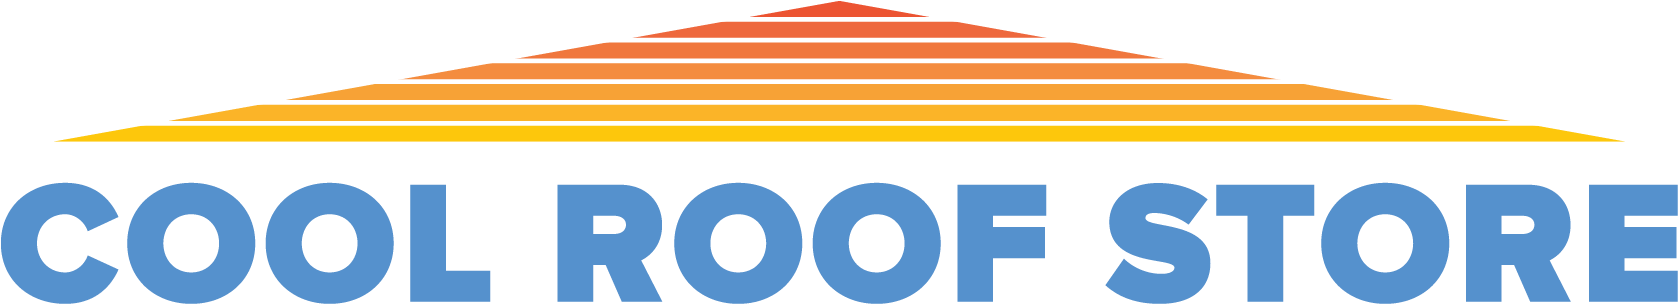 Cool Roof Store (1713x303)